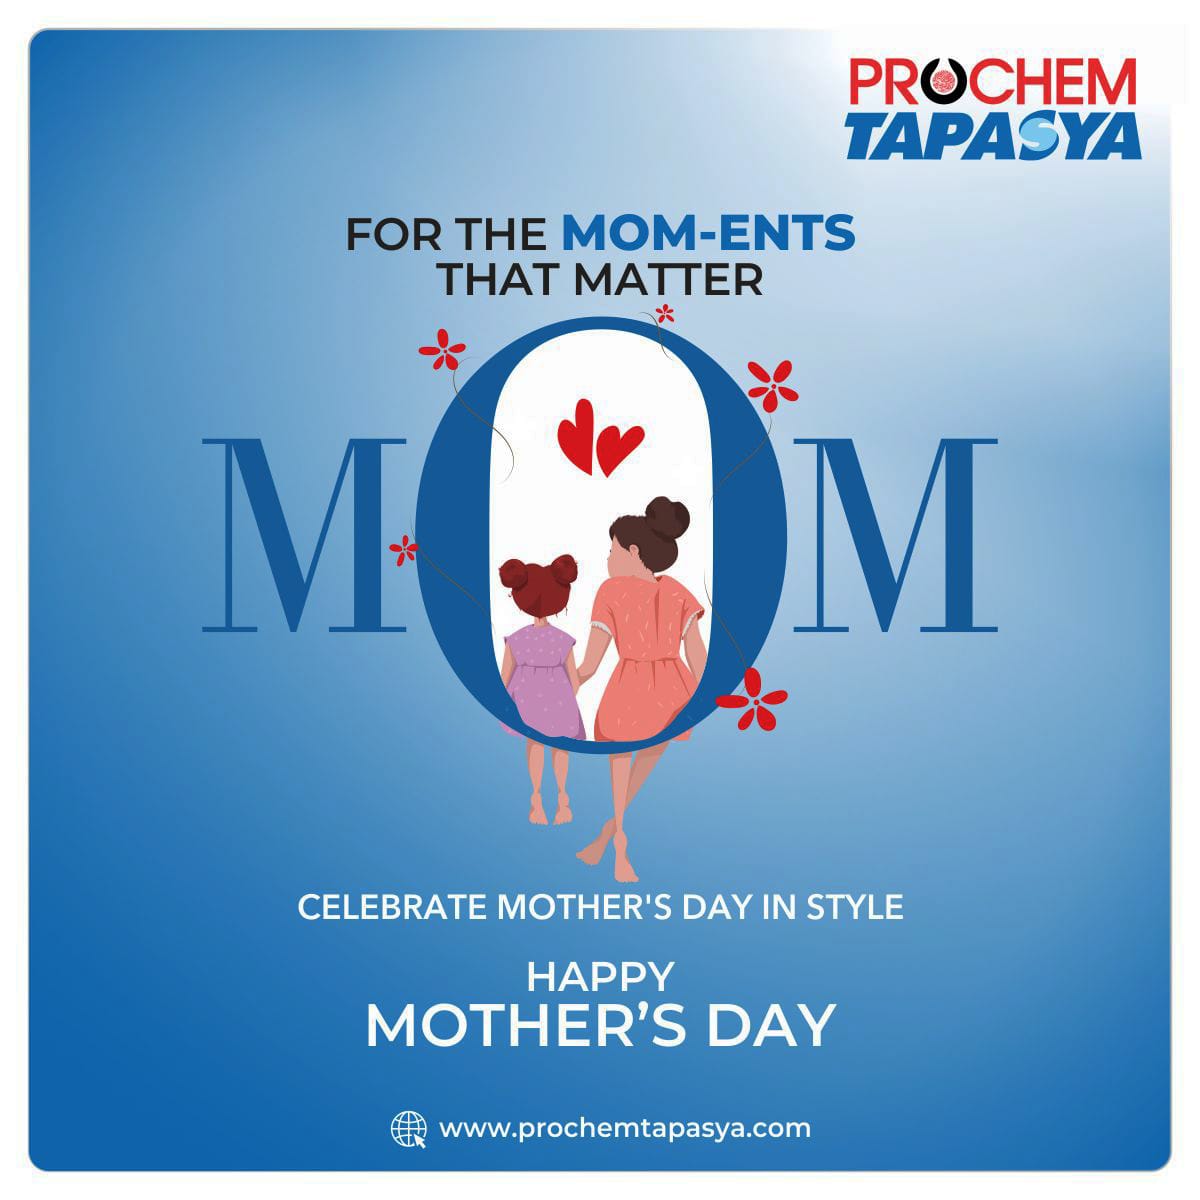 Capture the Mom-ents that matter most this Mother’s Day! It’s time to celebrate and honor the incredible woman who has filled our lives with love and joy. 

#HappyMothersDay #MothersDay2023 #UnconditionLove #ExtraordinaryWomen #Love